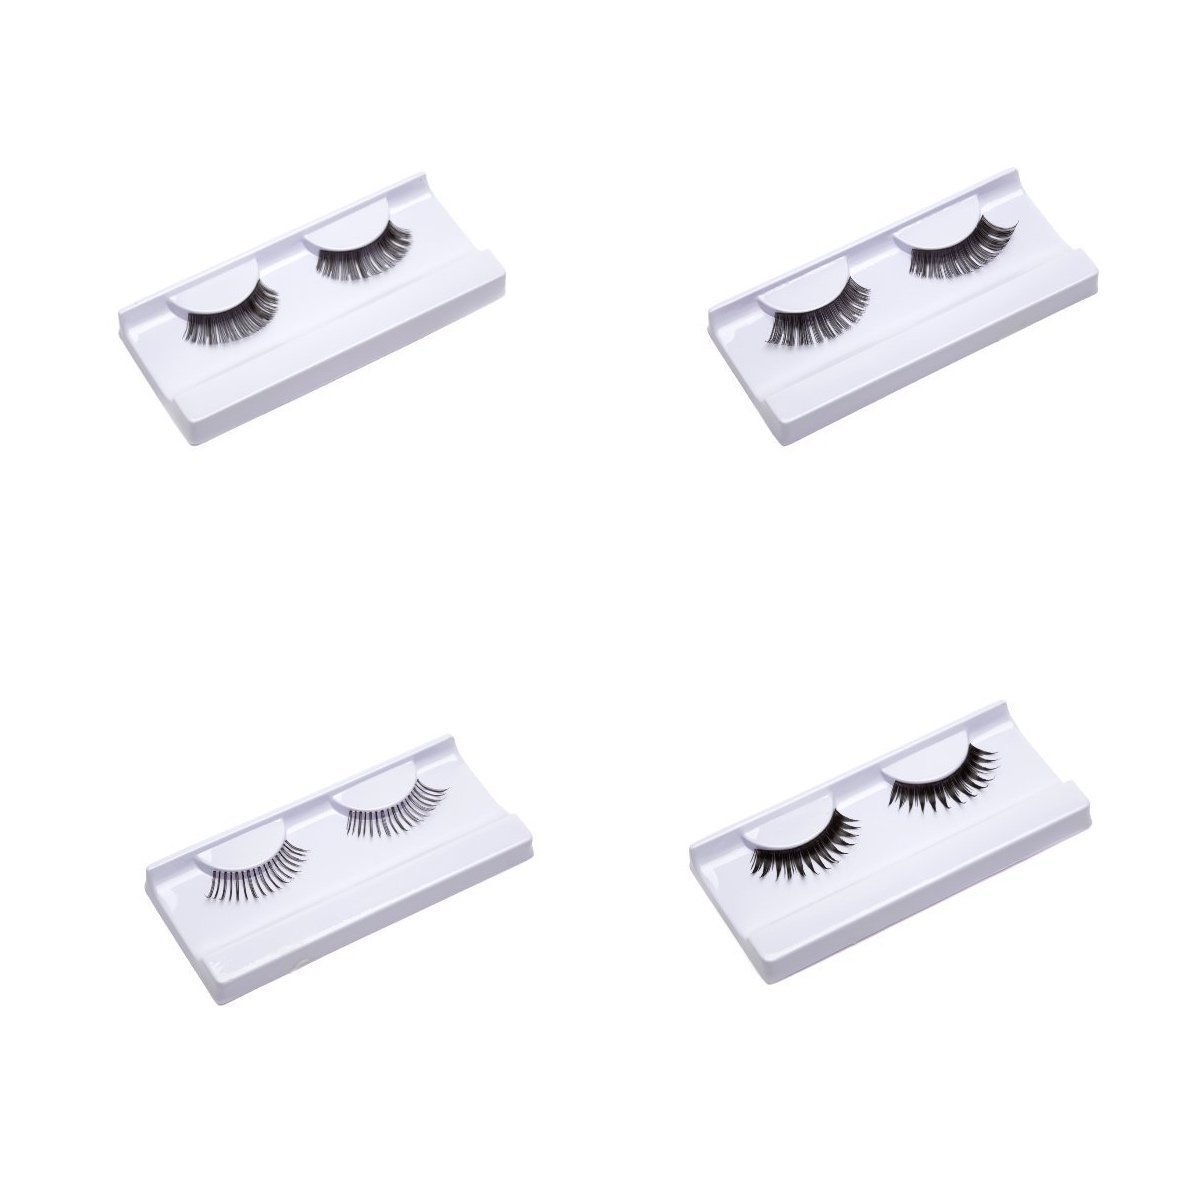 Pack of 4 Lash Strips for Volume, Lengthening or Definition - Beauty Hair Products LtdLashes